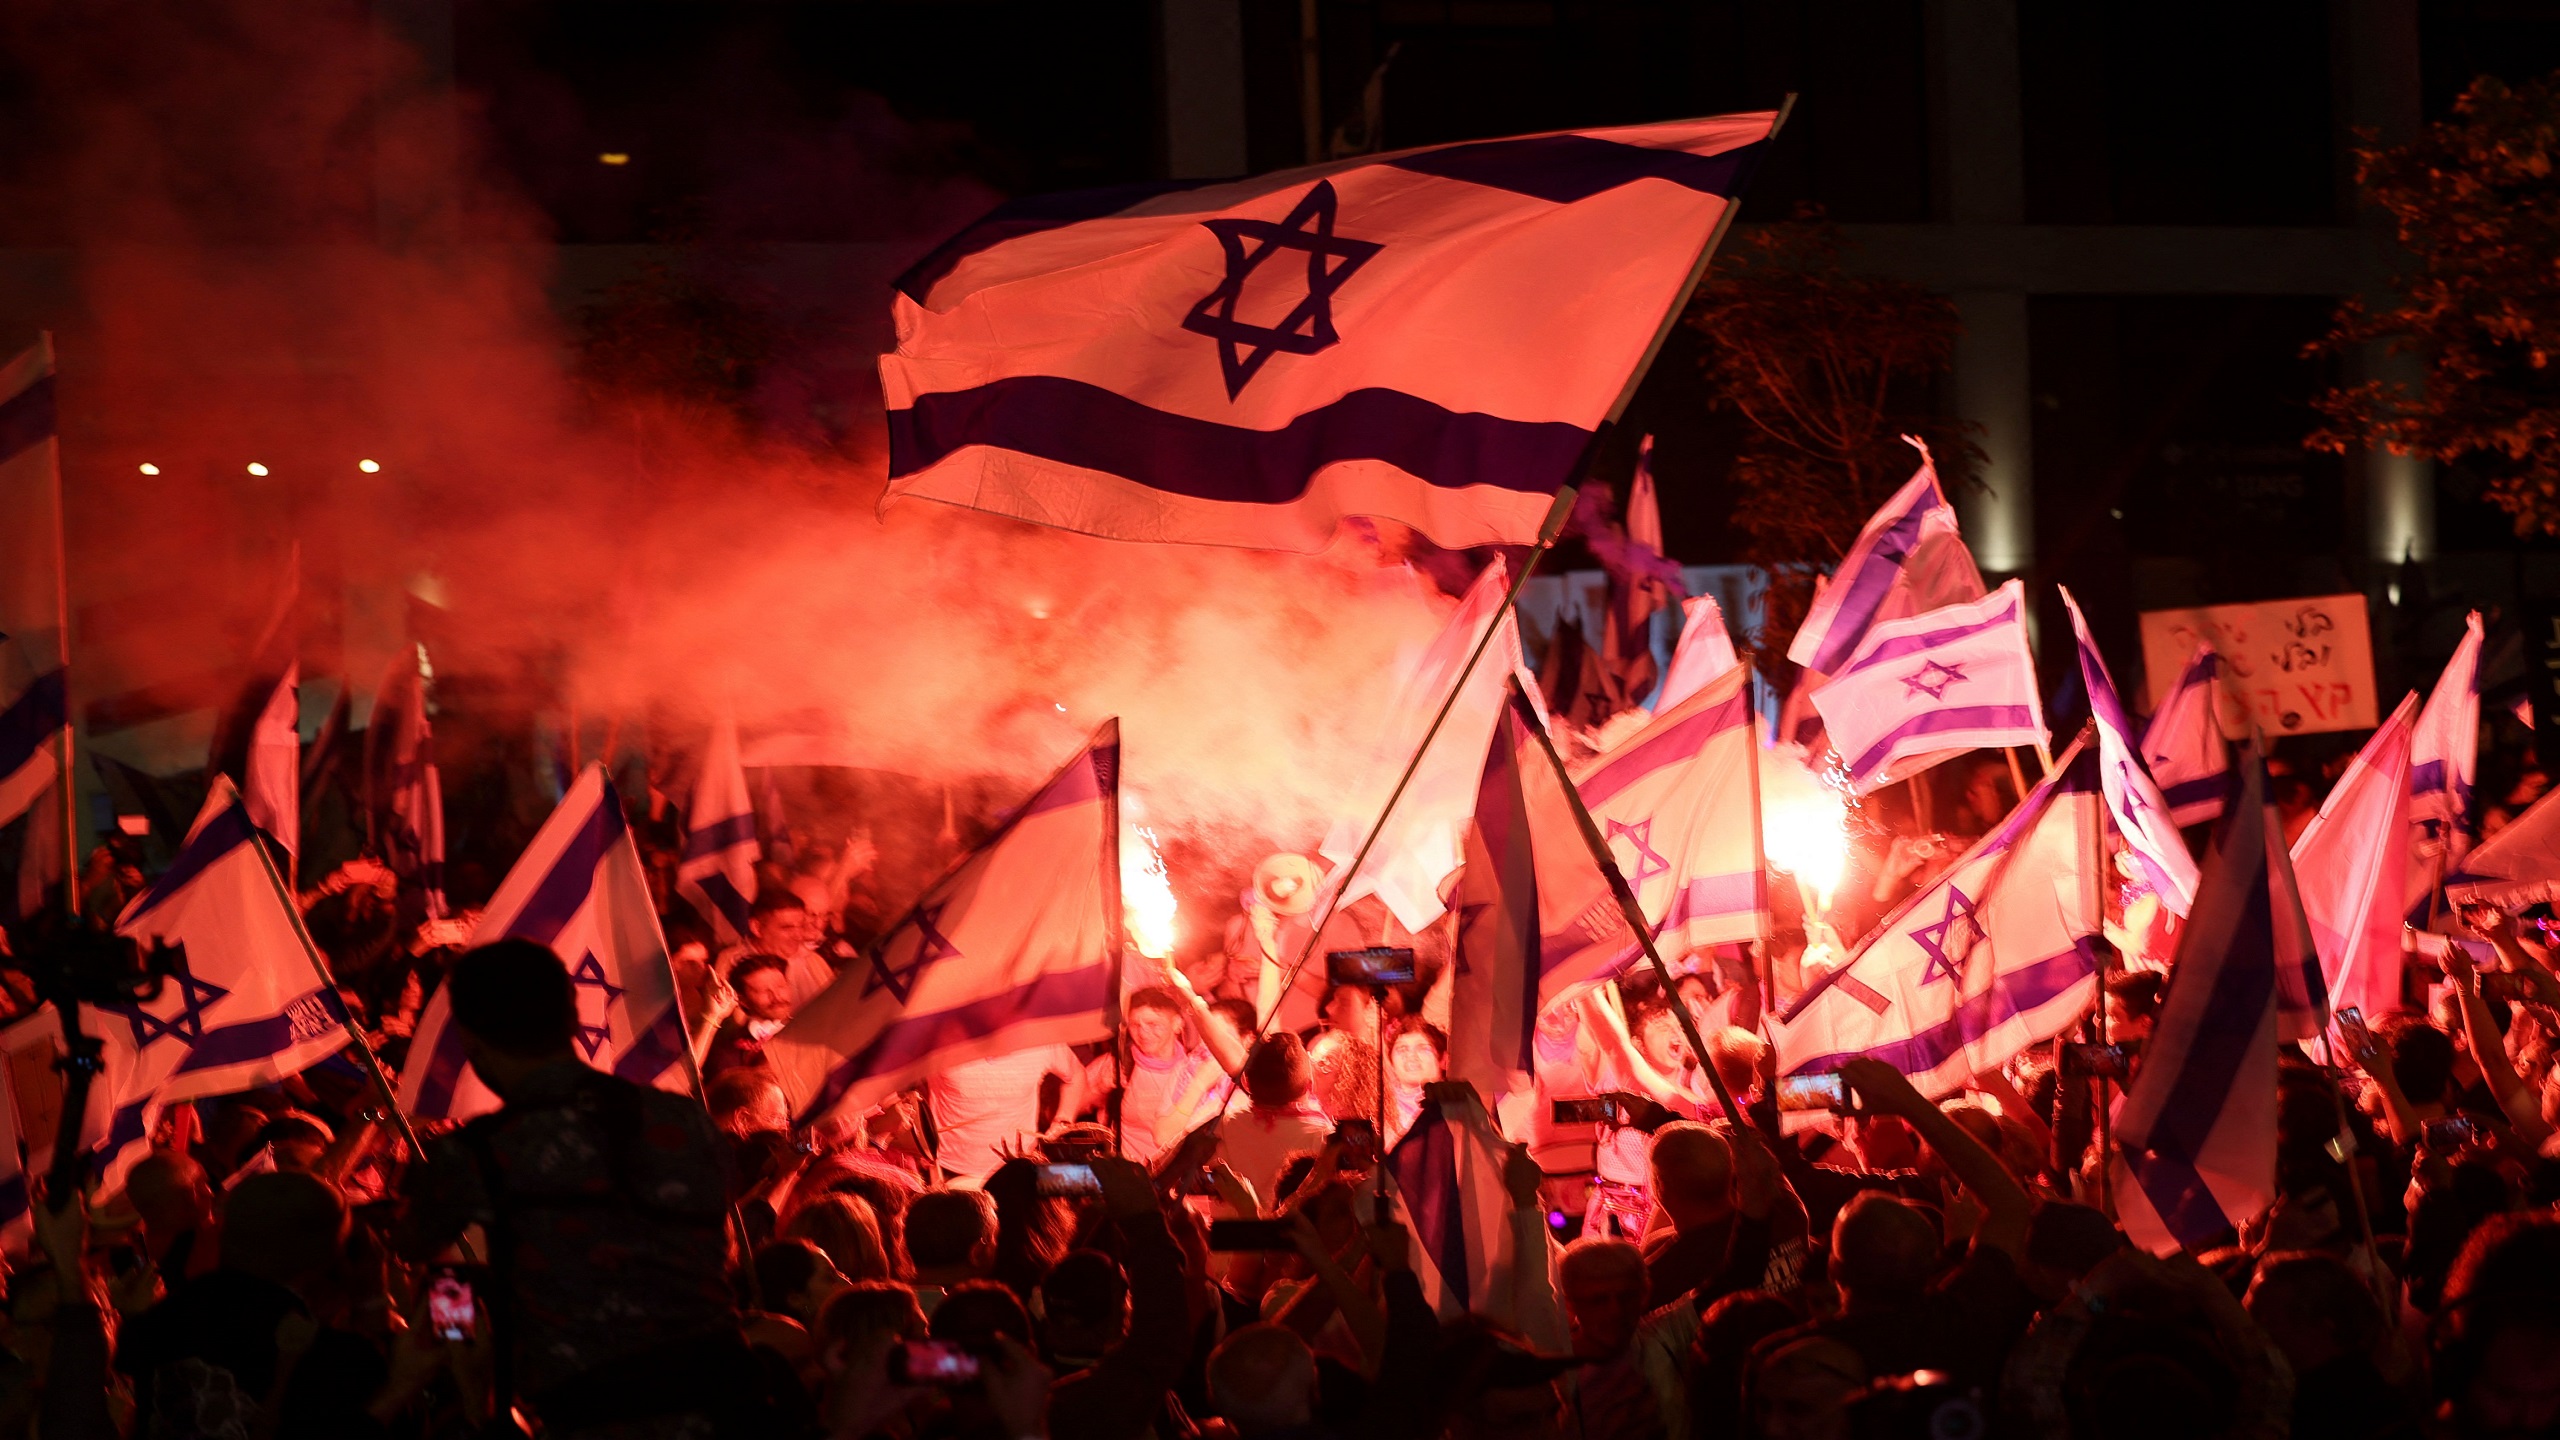 Israel Celebrates 75th Independence Day Amid Protests, Political Divisions